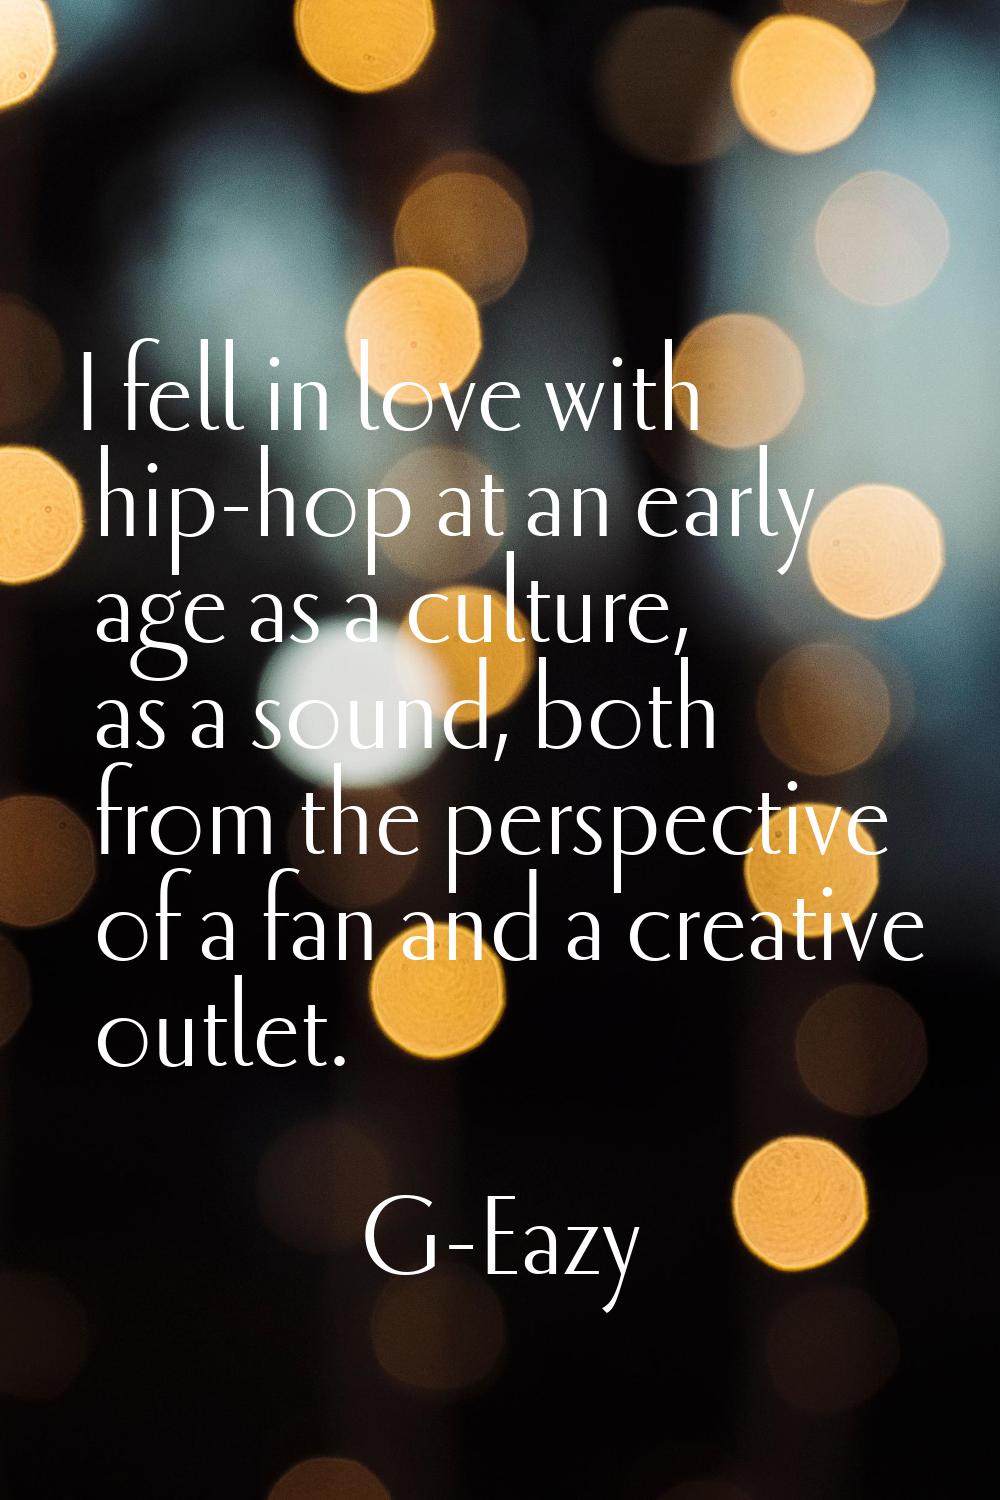 I fell in love with hip-hop at an early age as a culture, as a sound, both from the perspective of 